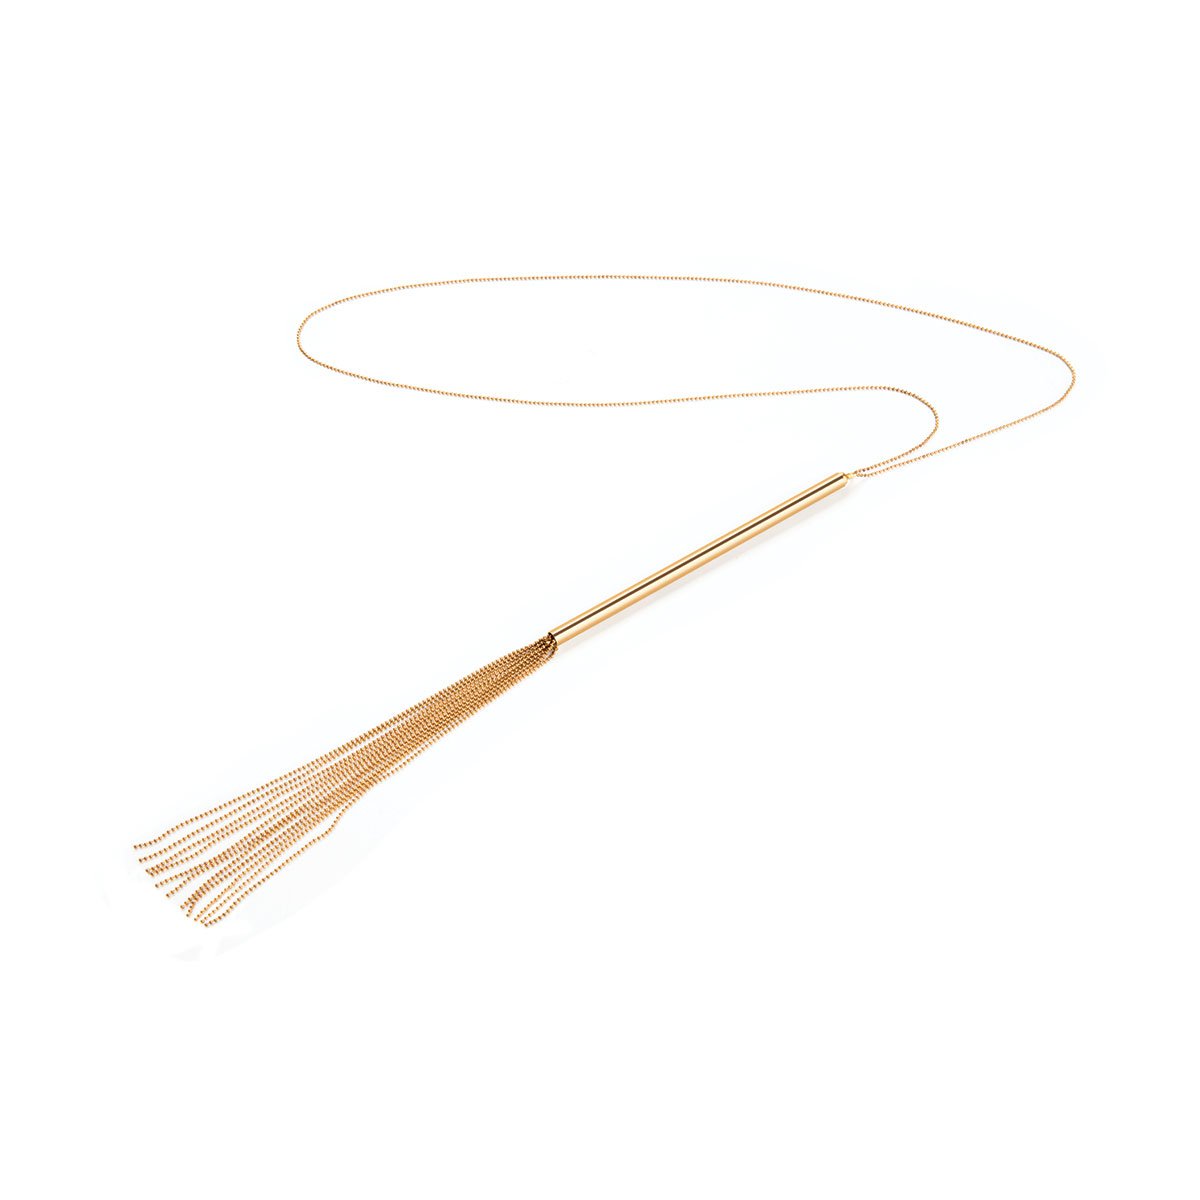 Bijoux Indiscrets Magnifique Neckless Whip - Buy At Luxury Toy X - Free 3-Day Shipping